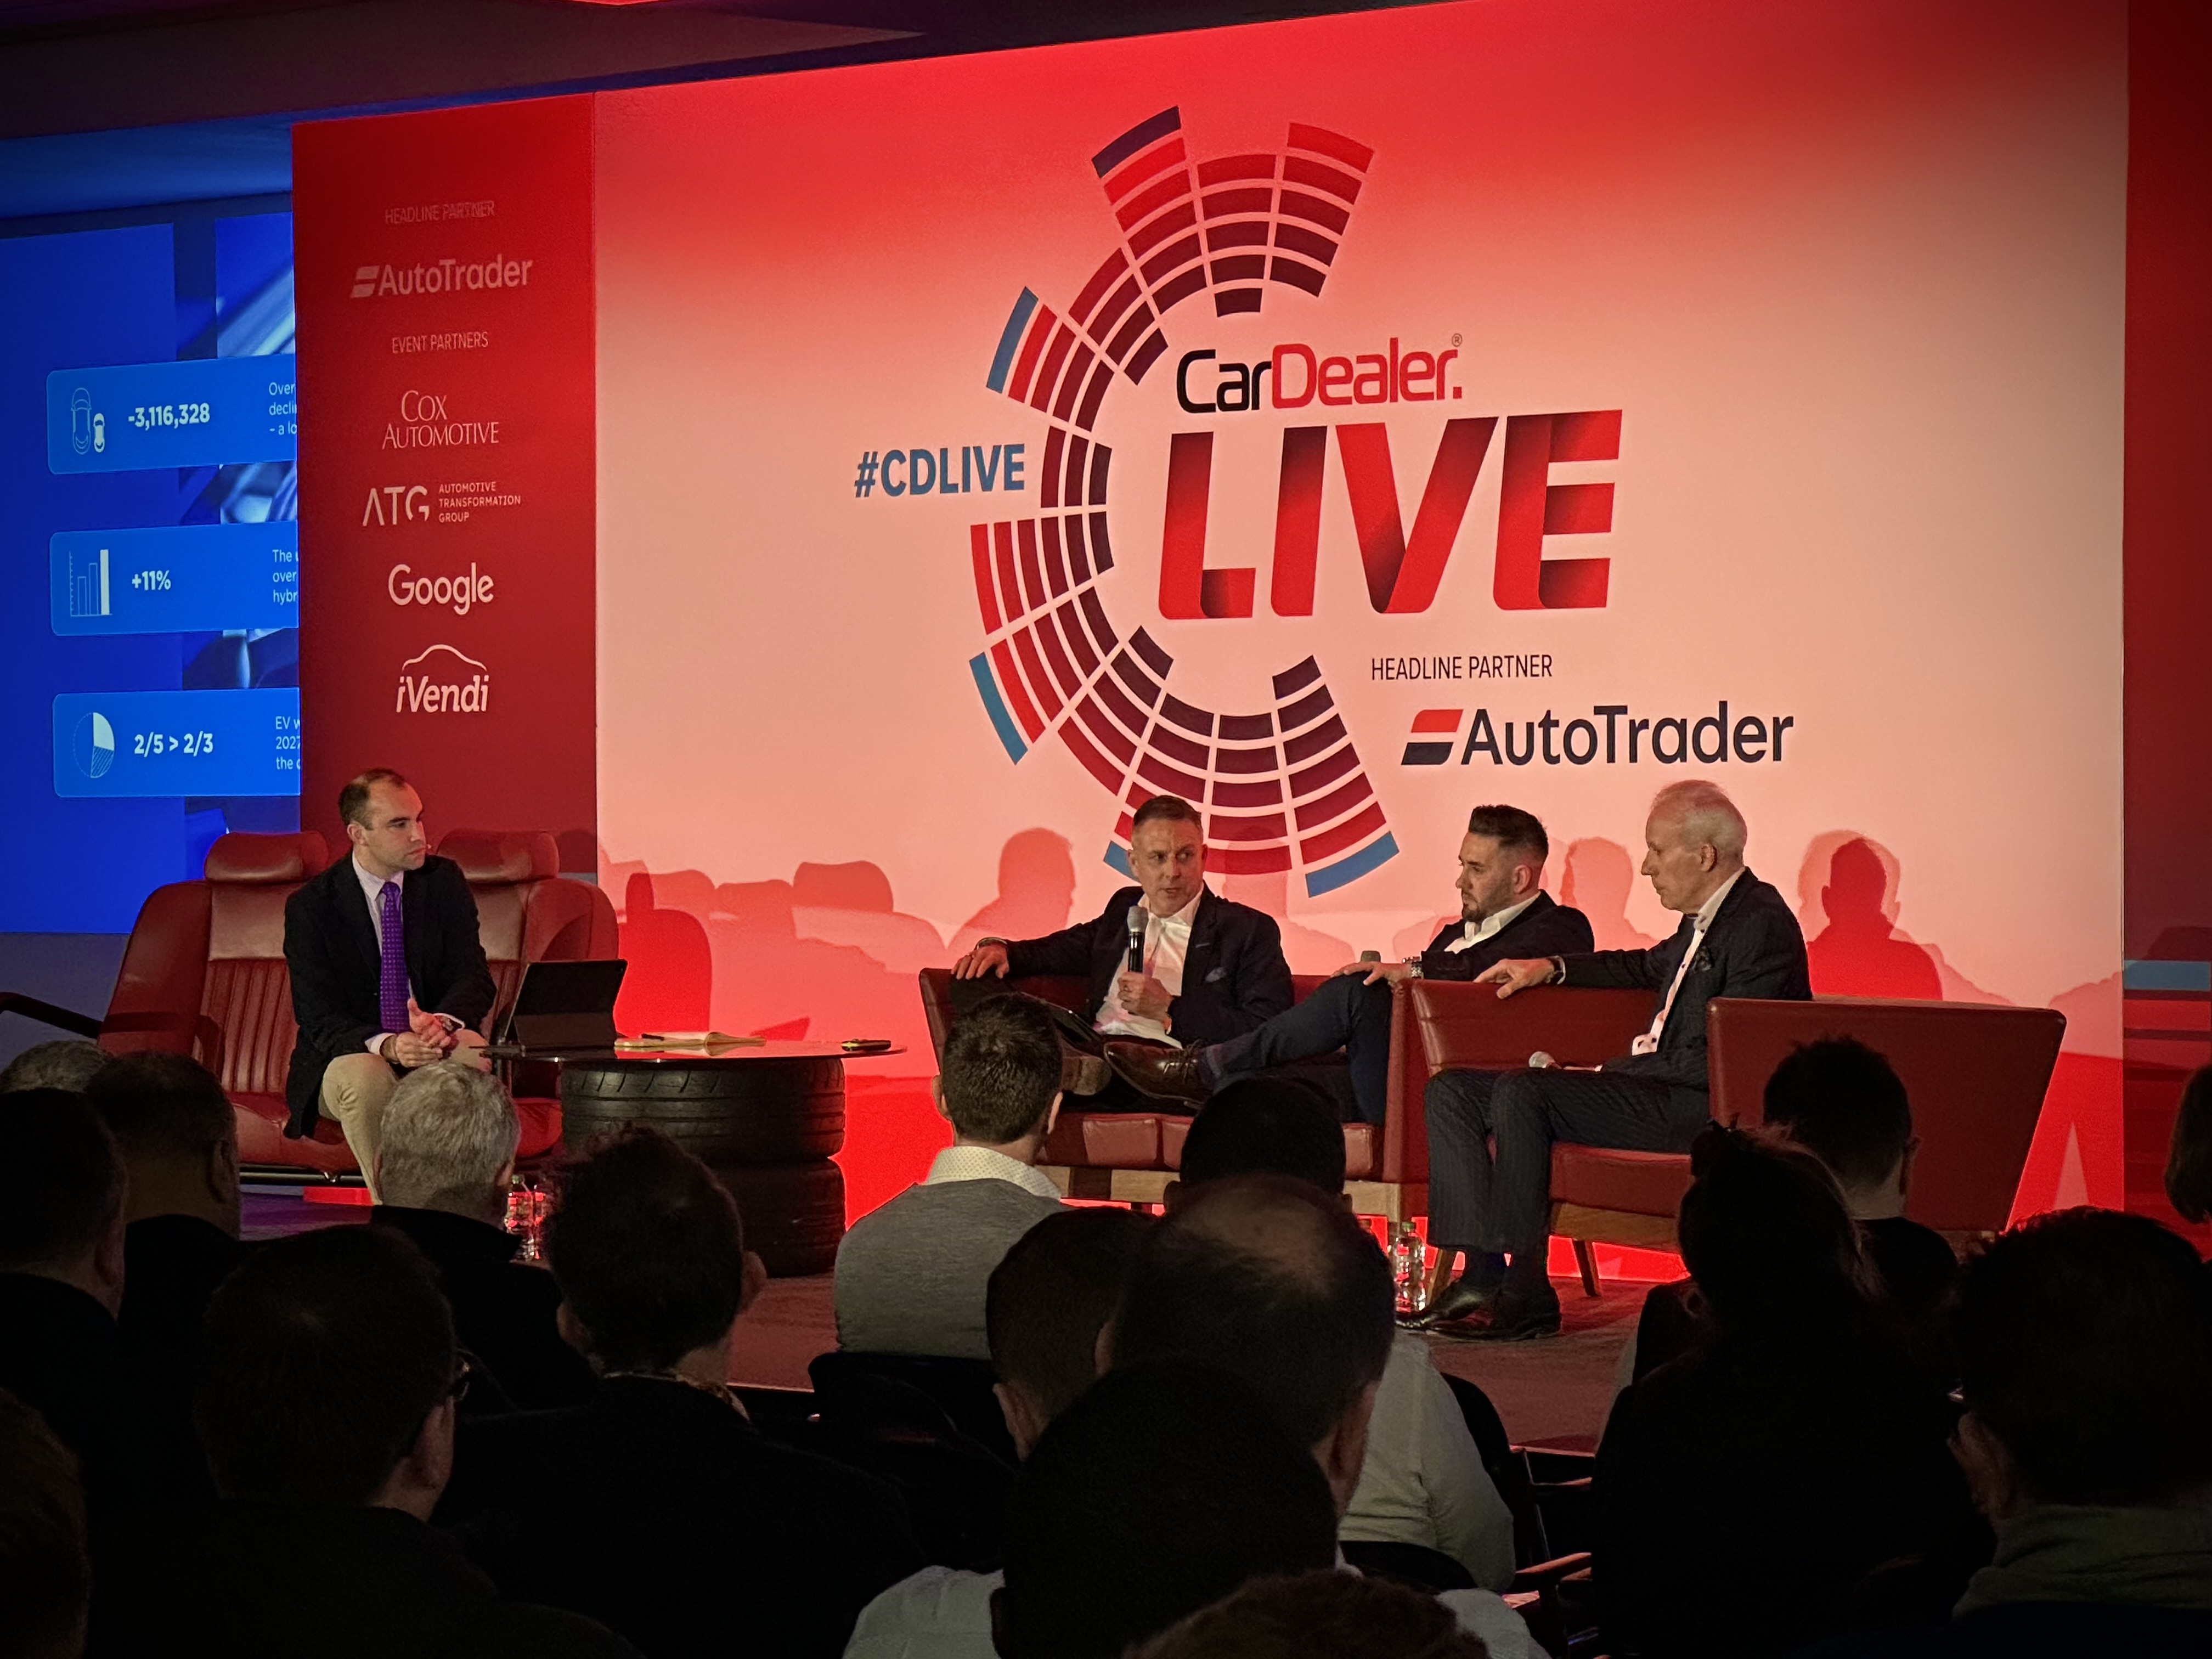 Insights, positivity and copious food for thought – Cox Automotive at Car Dealer Live